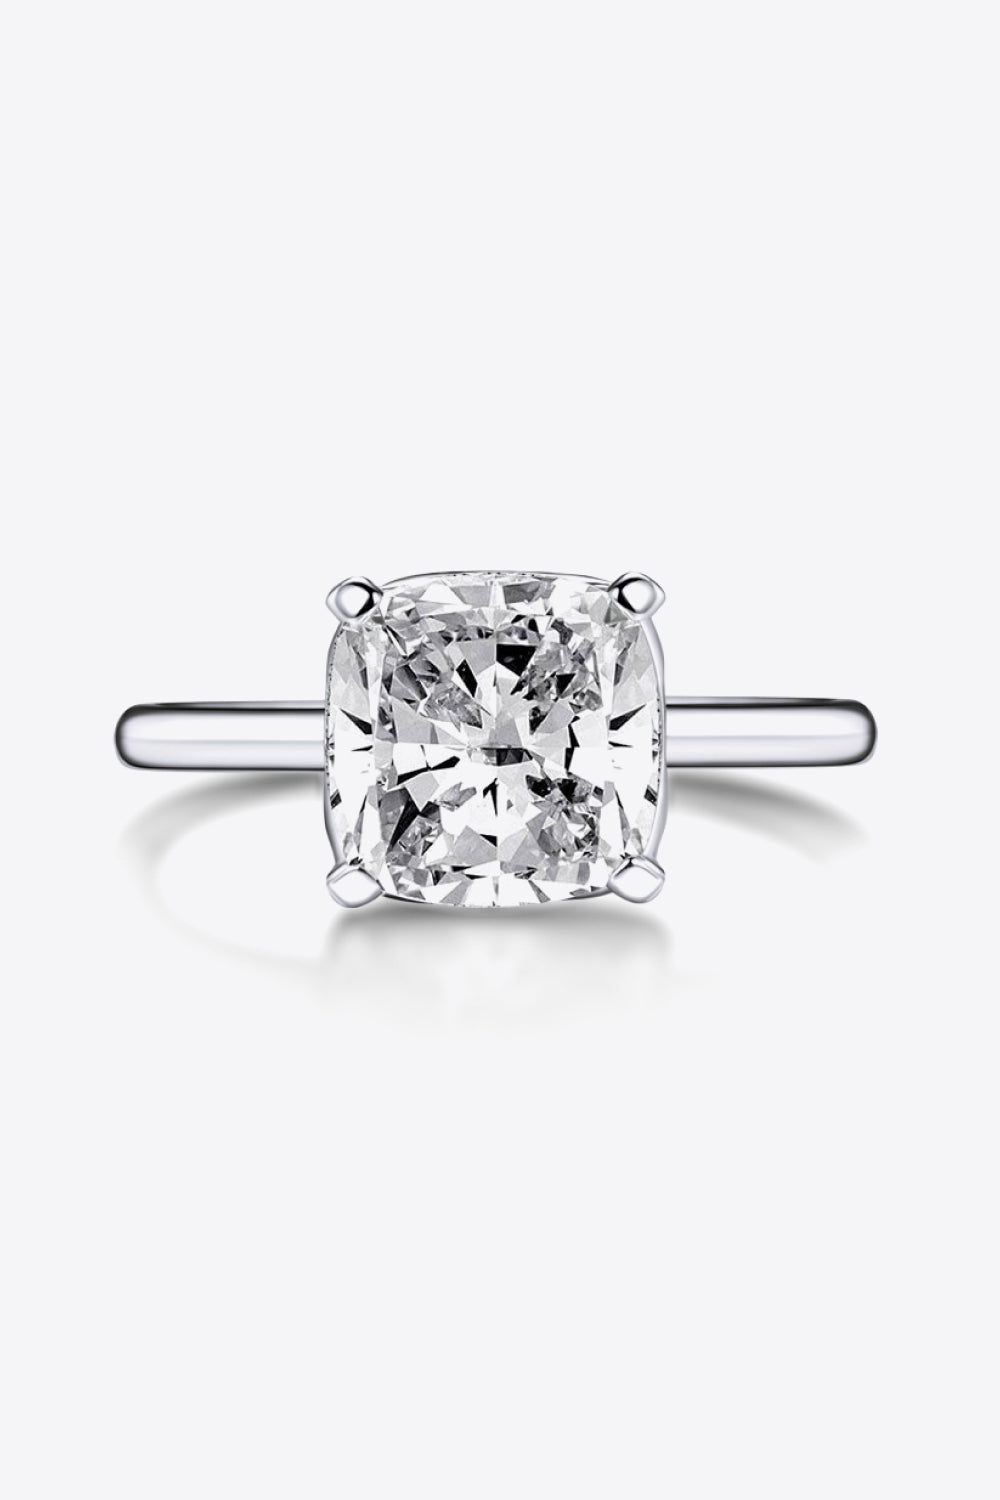 3.5 Carat Zircon 4-Prong Ring - Tophatter Shopping Deals - Electronics, Jewelry, Beauty, Health, Gadgets, Fashion